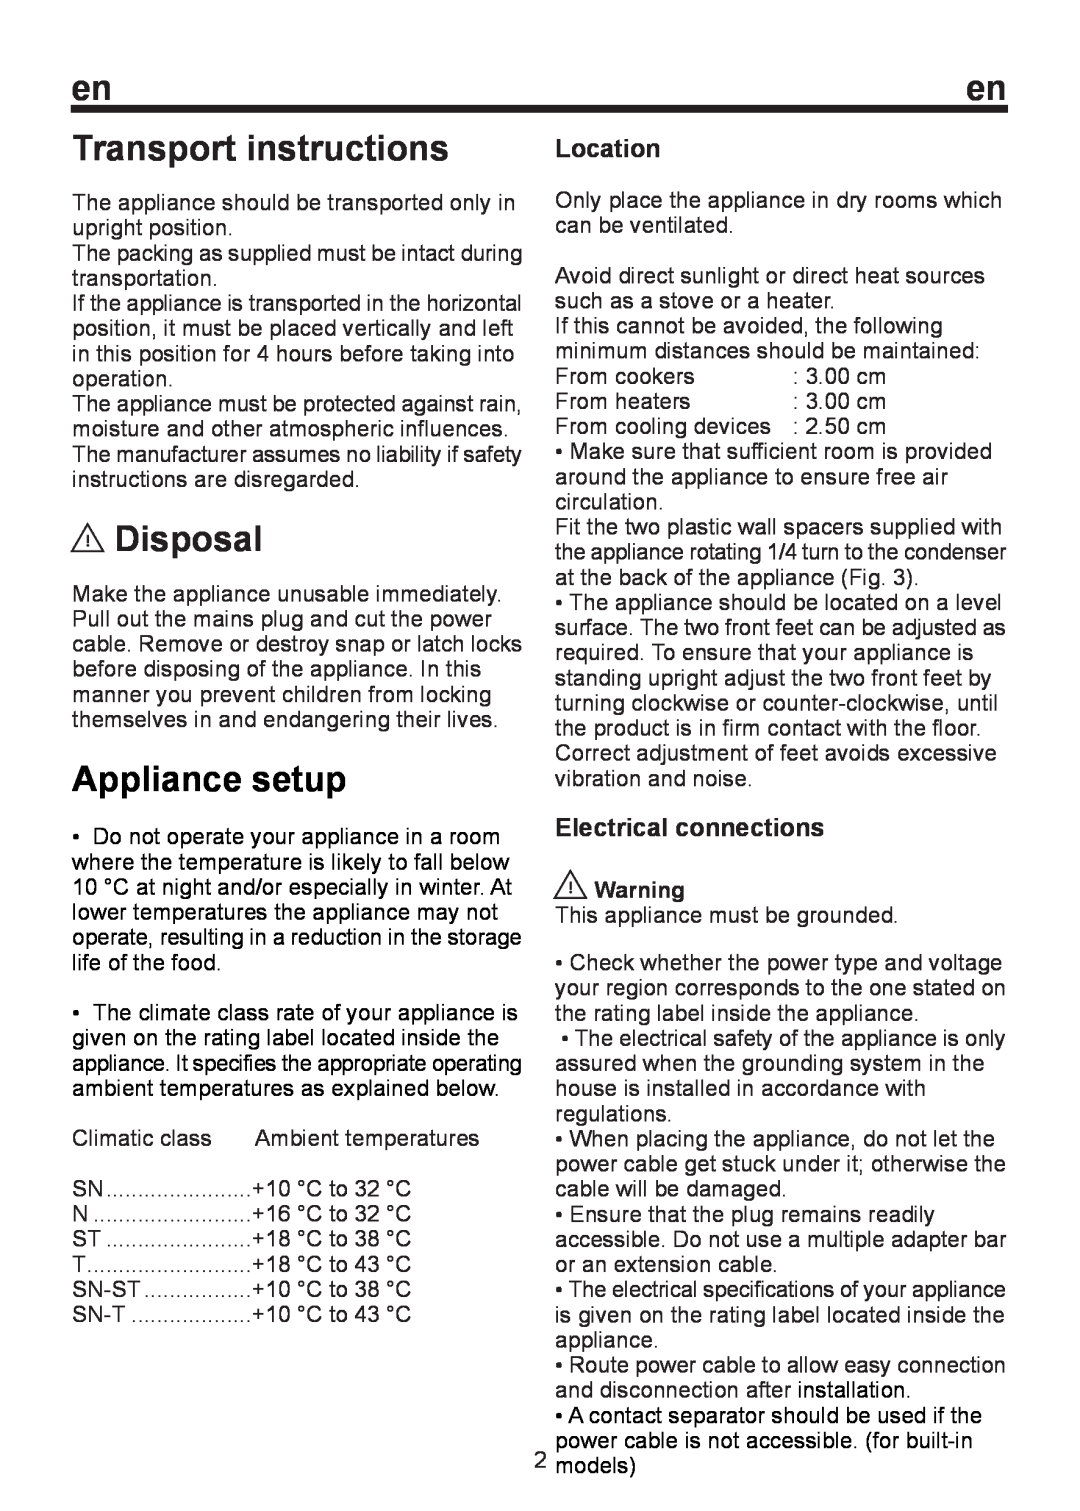 Smeg CV 260 NF instruction manual Transport instructions, Disposal, Appliance setup, Location, Electrical connections 